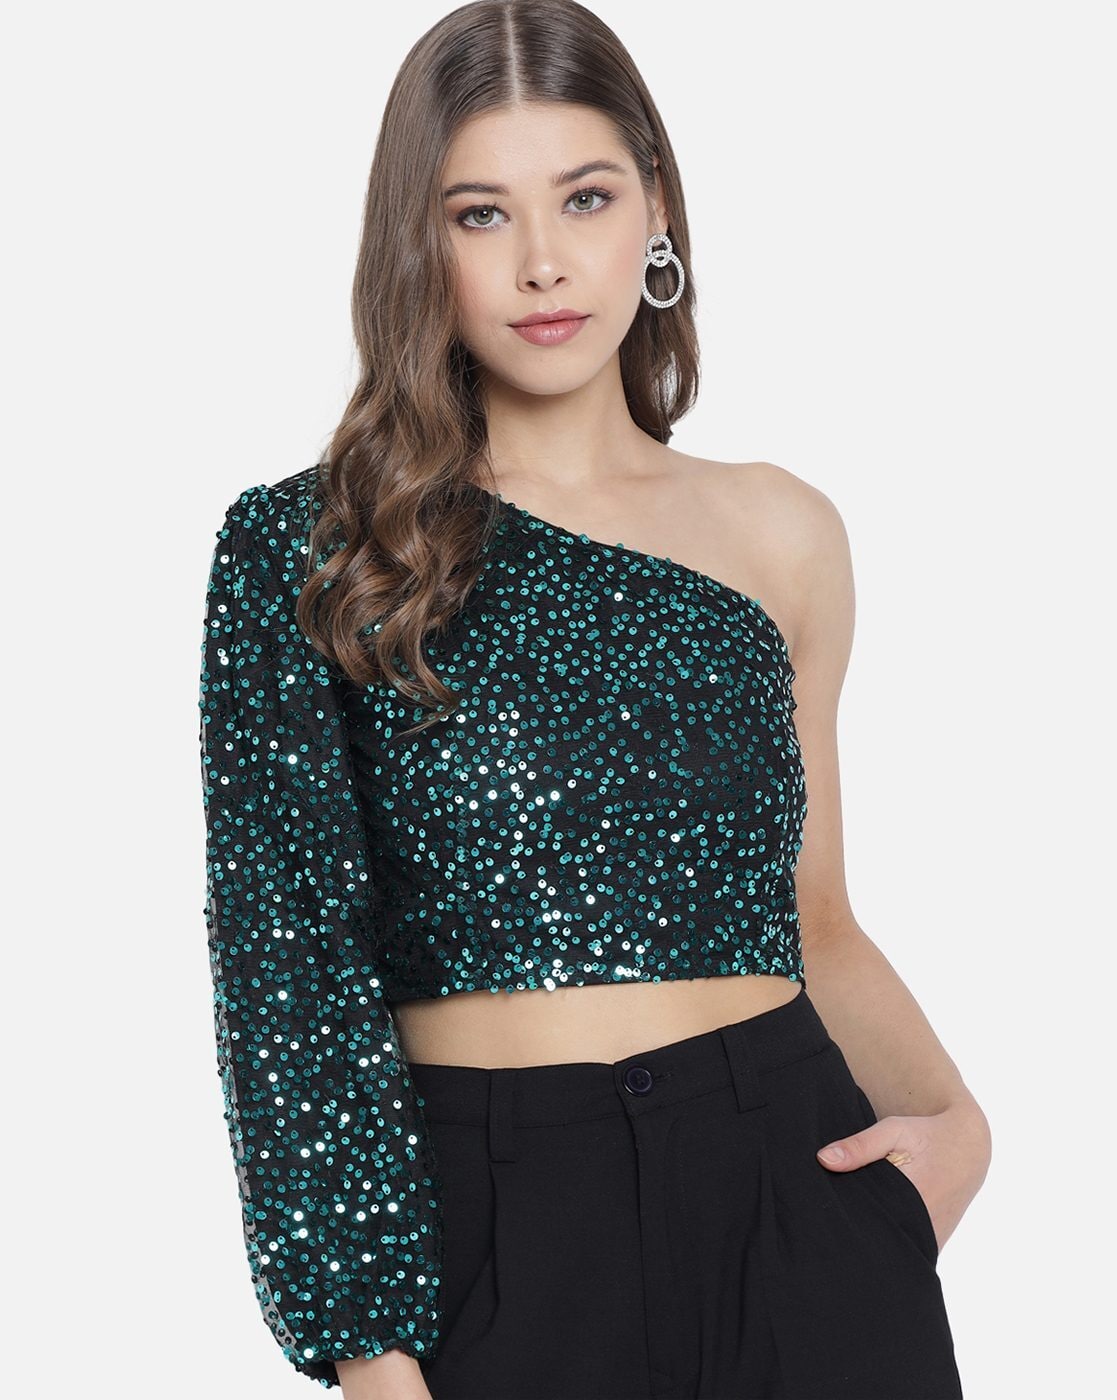 edgely™ Sequin Padded Shoulder Top